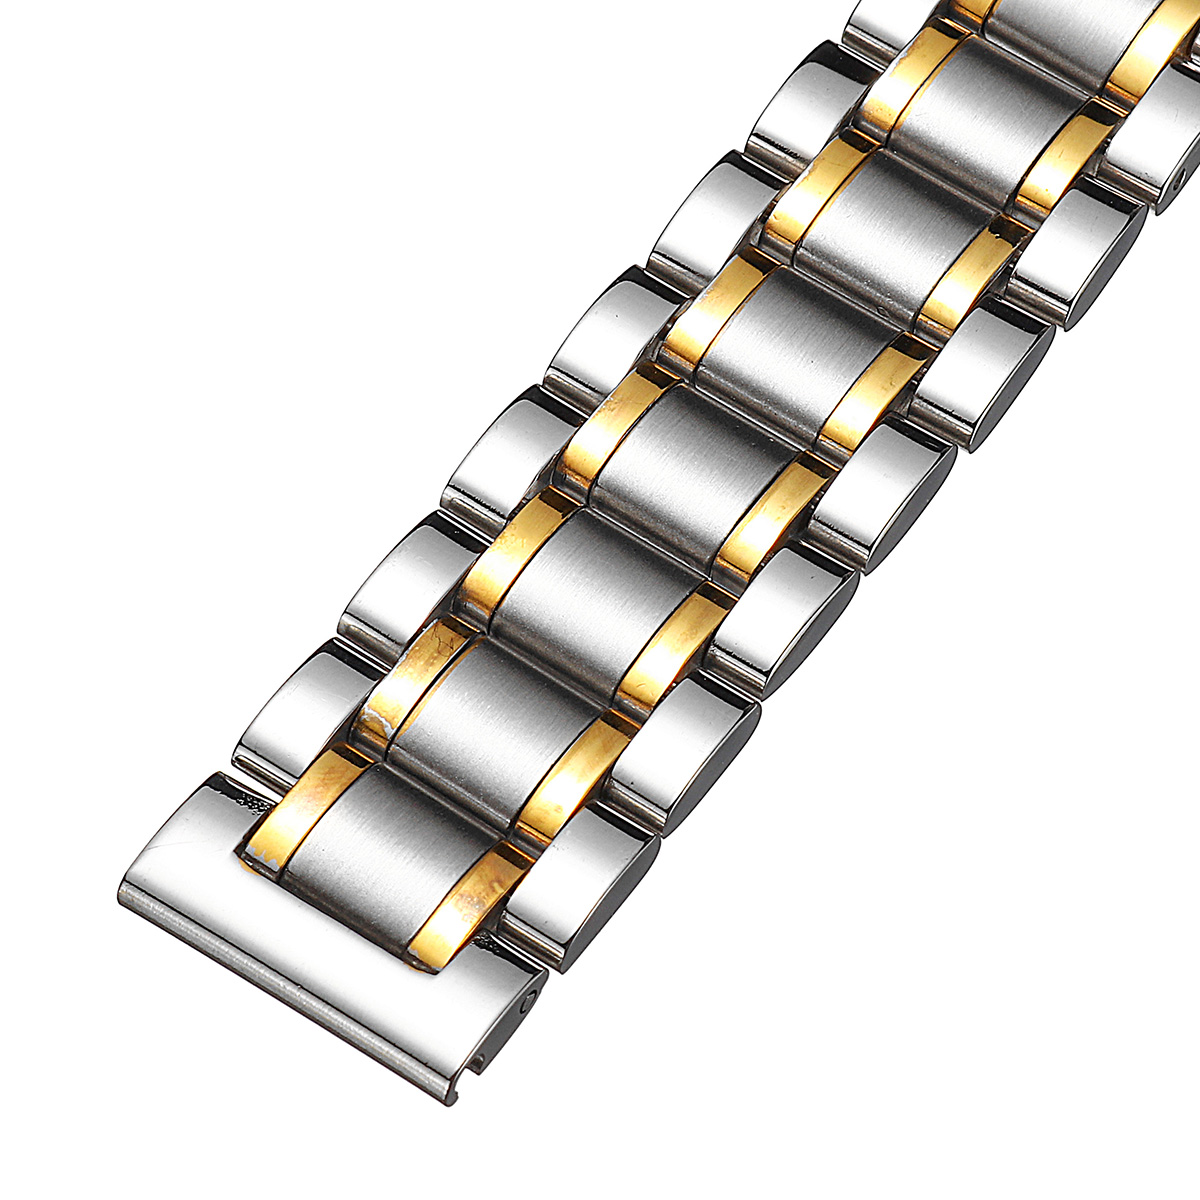 18-22mm-Stainless-Steel-Watch-Band-Clasp-Metal-Strap-Replacement-With-Spring-Bars-1368341